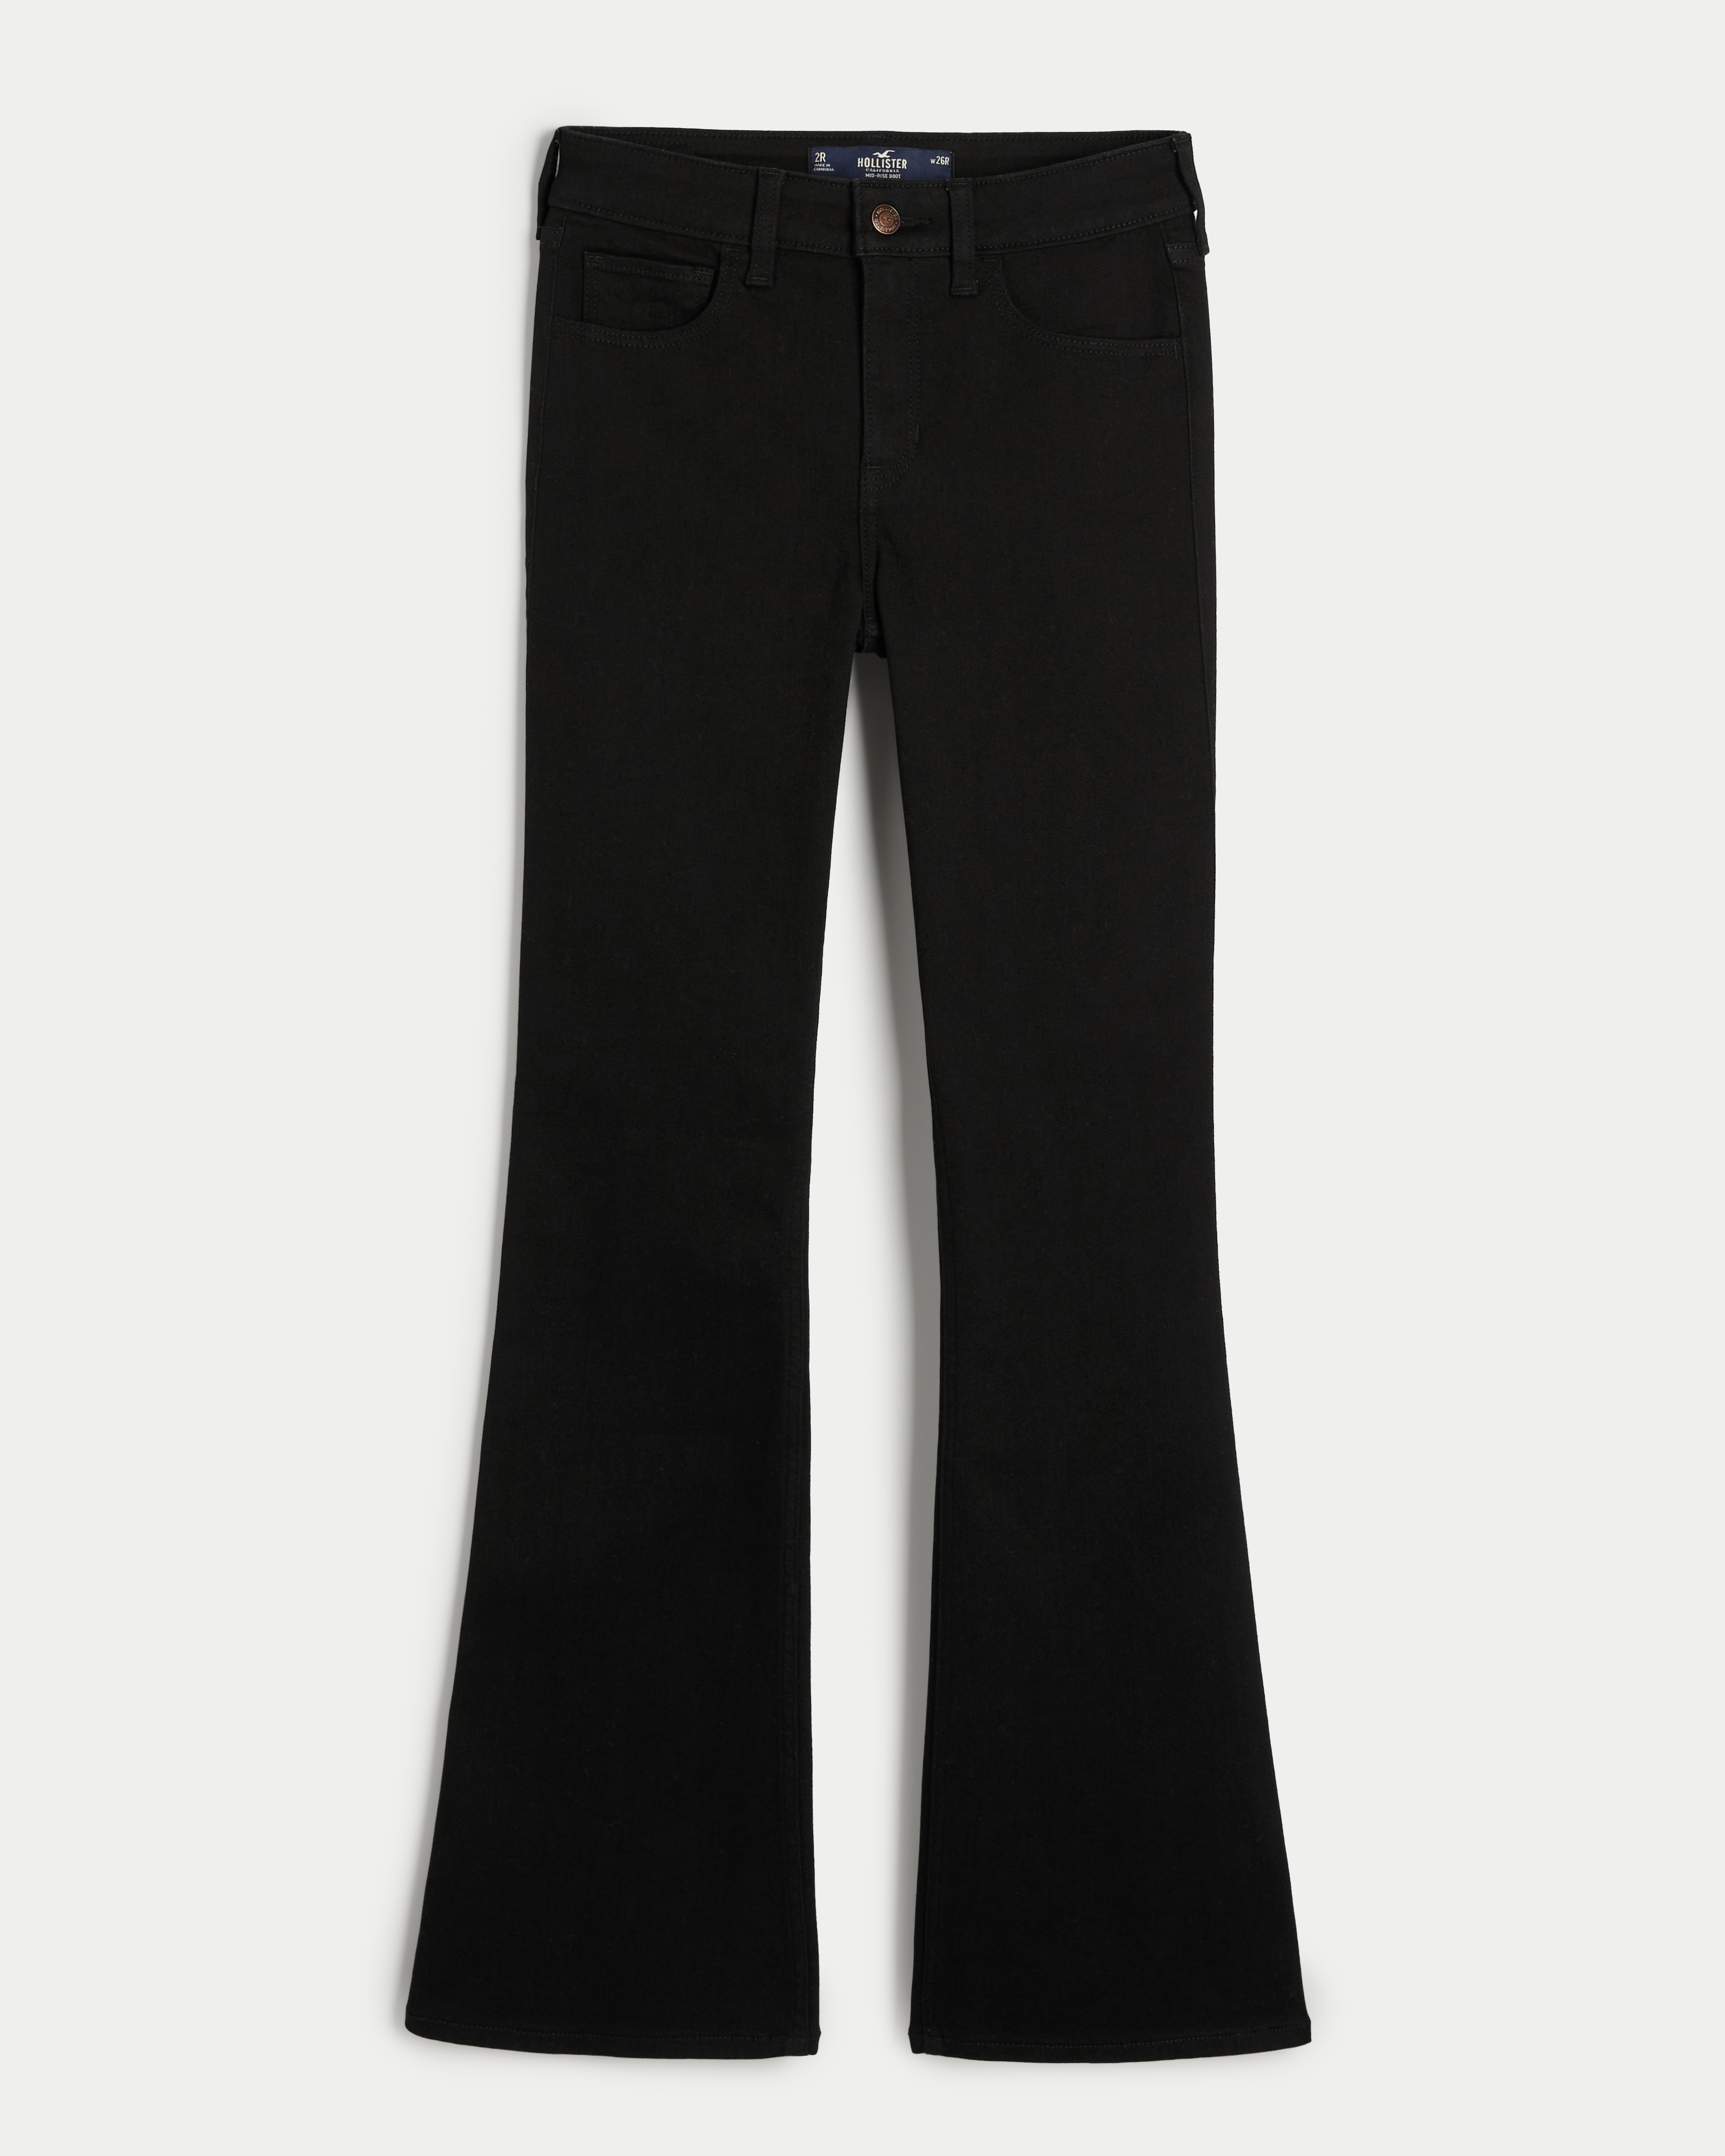 HOLLISTER Leather pants for women, Buy online